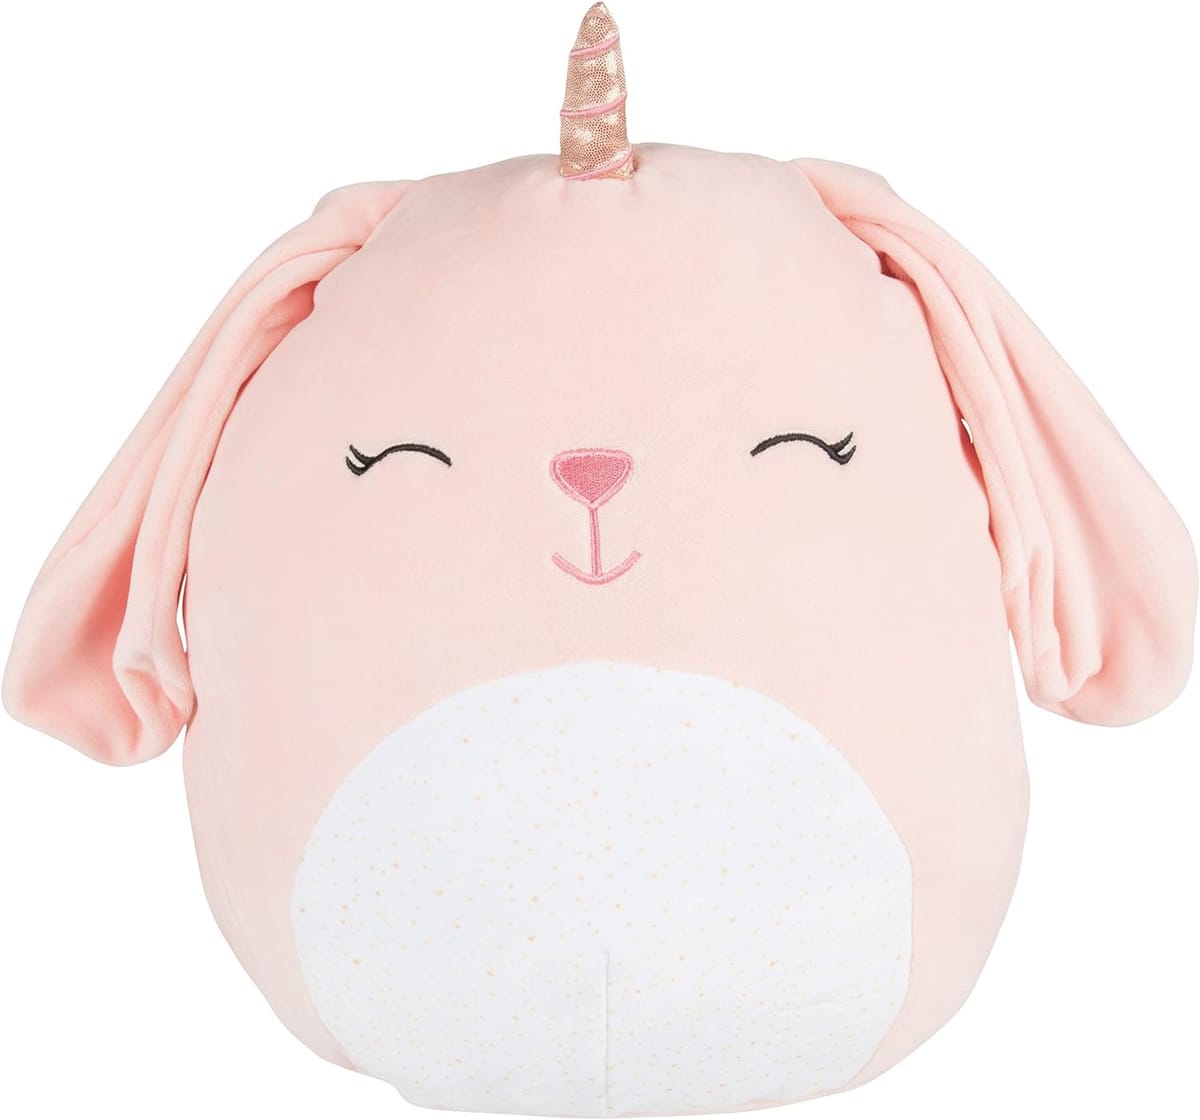 What is a Squishmallow